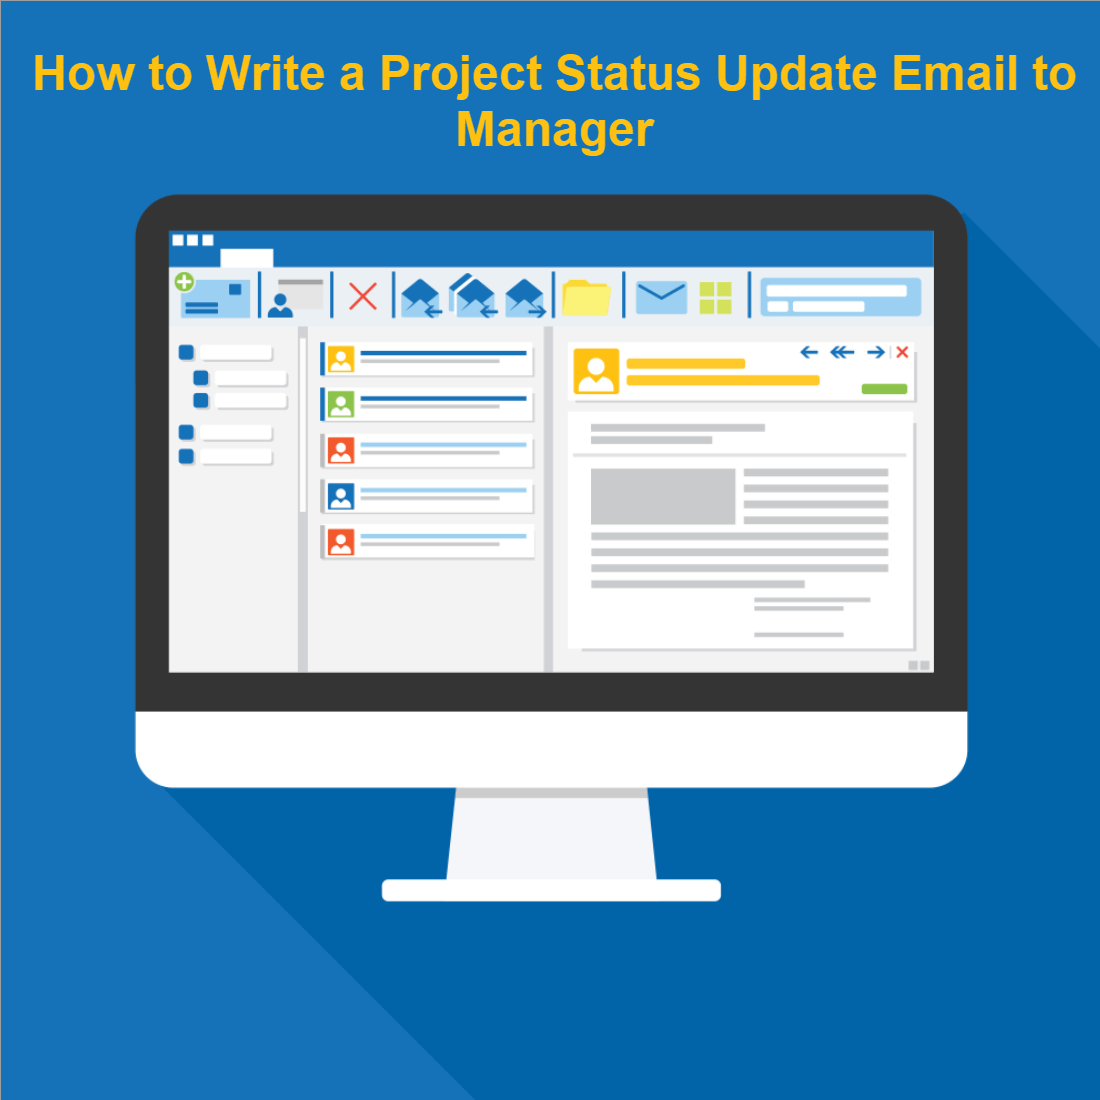 How to Write Email to Manager Regarding Updates